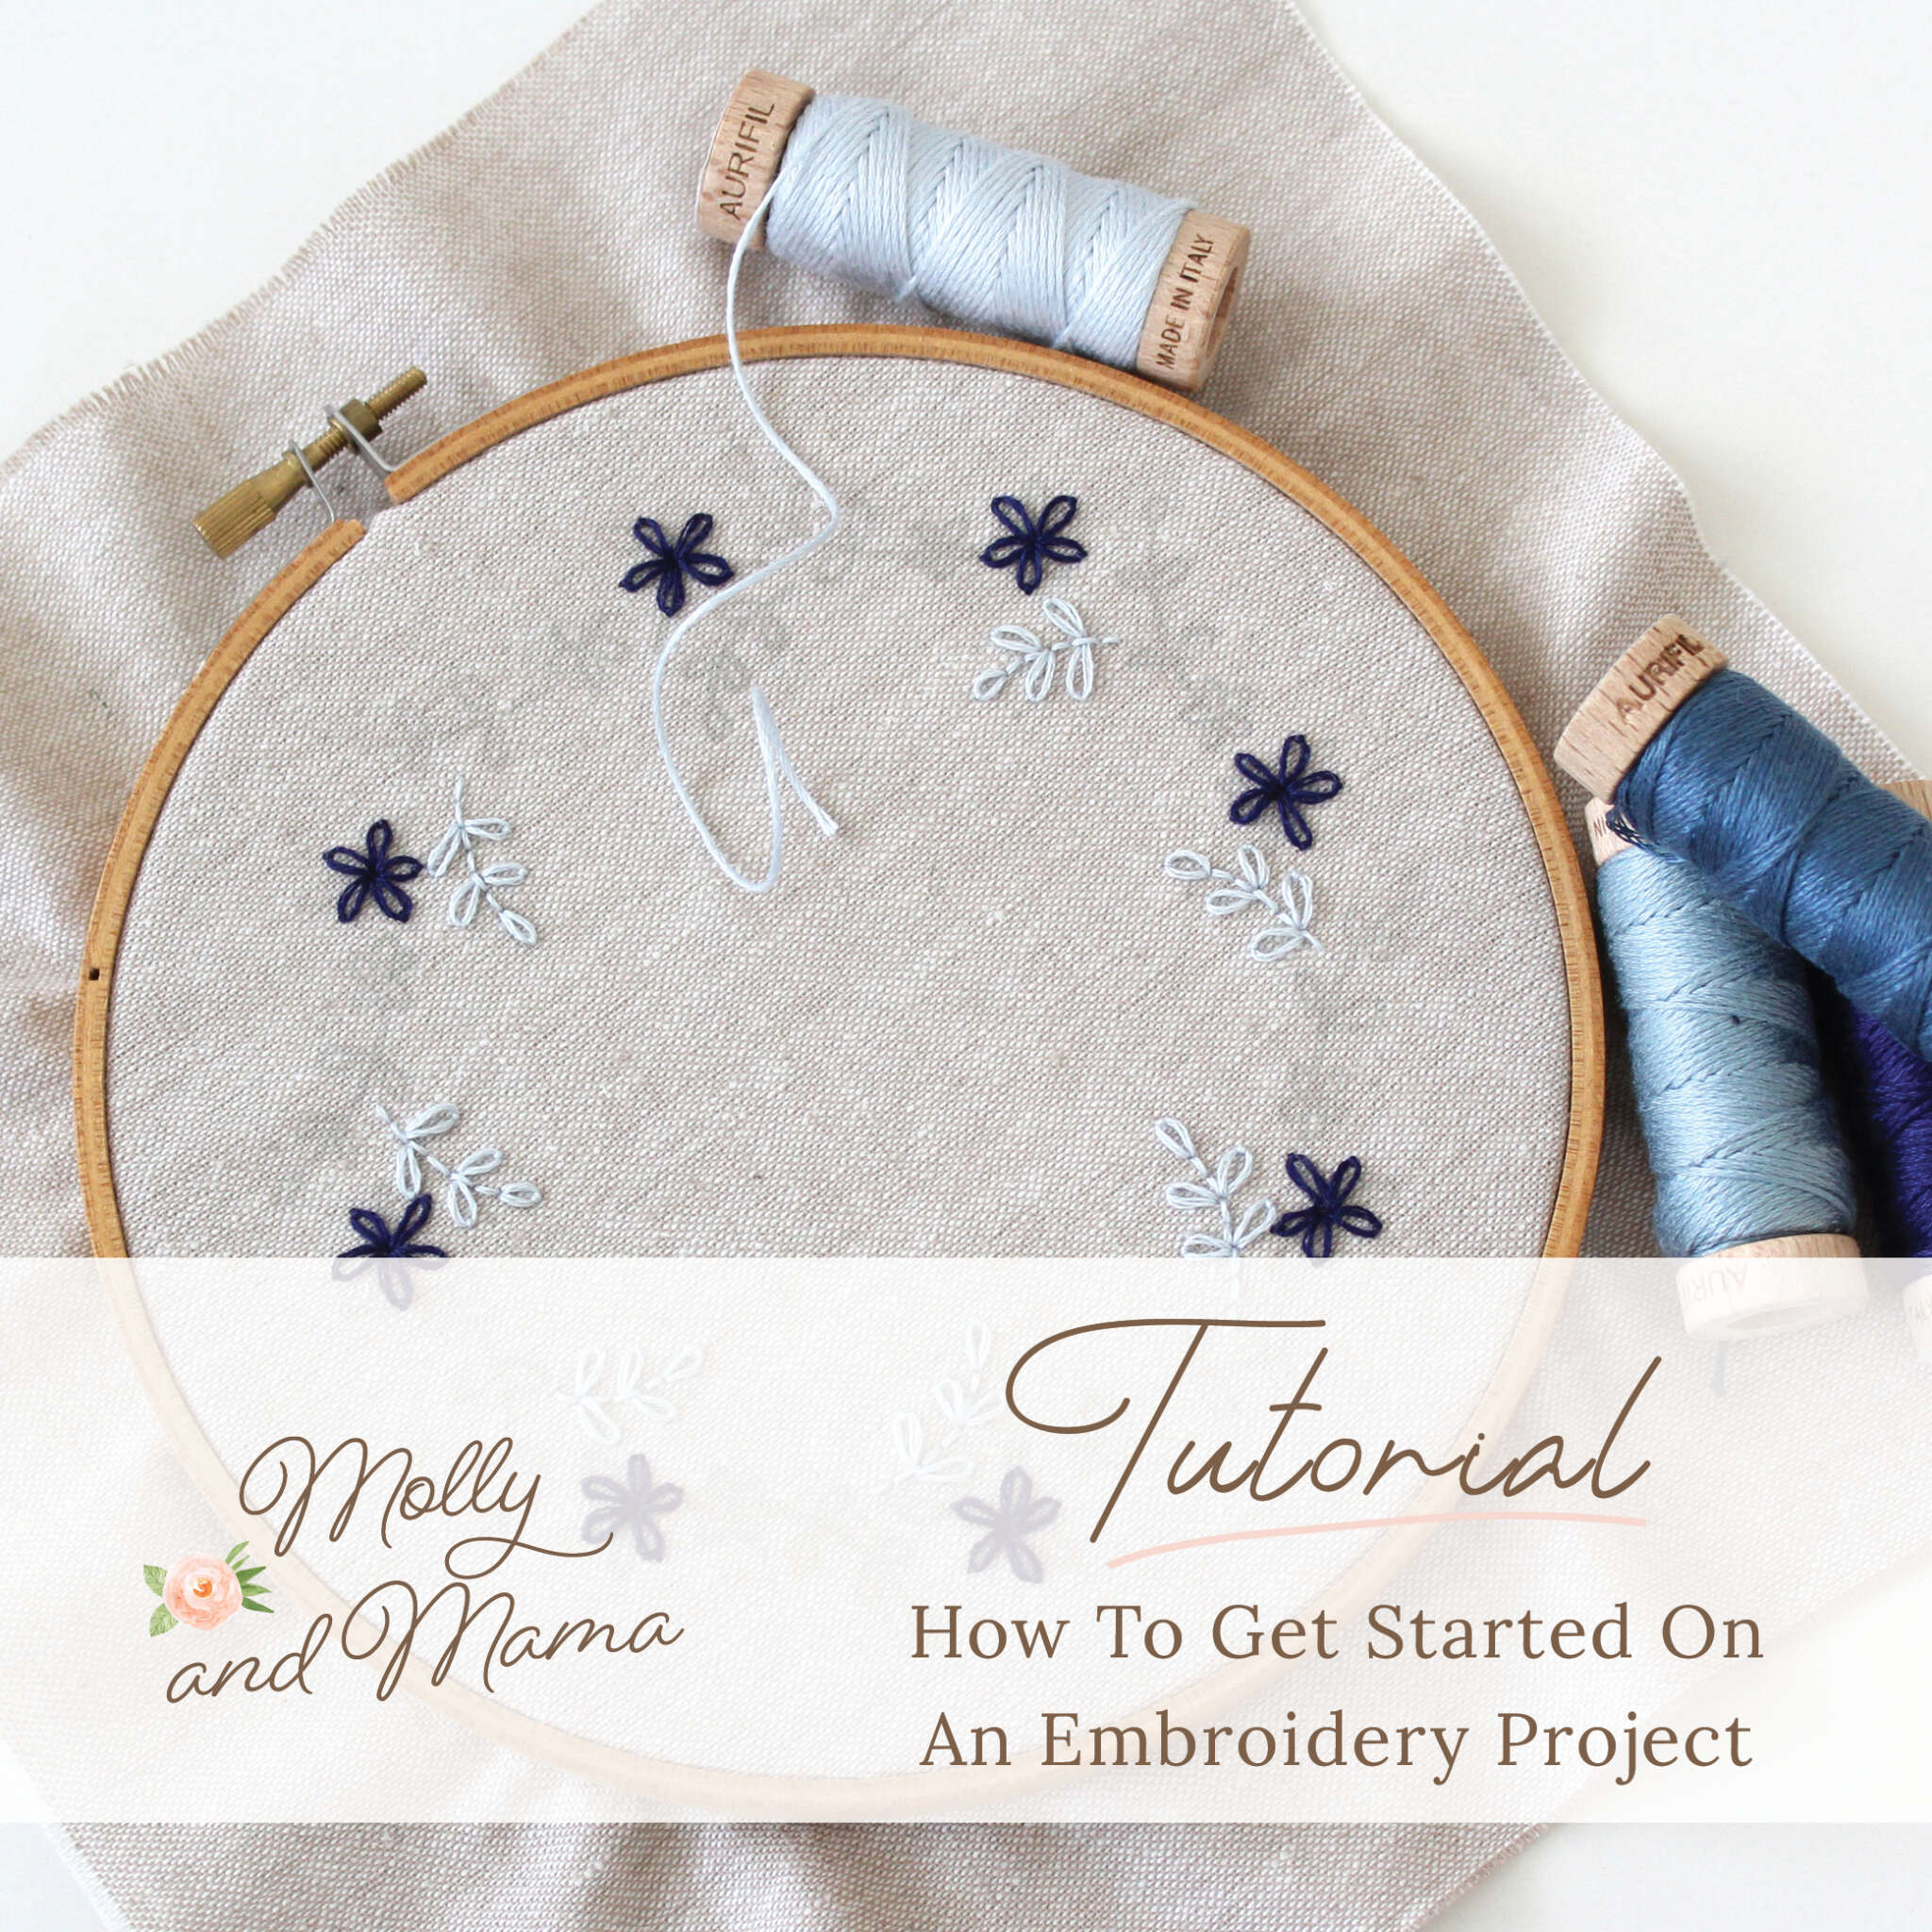 How to Make Embroidery Transfers With a Cricut